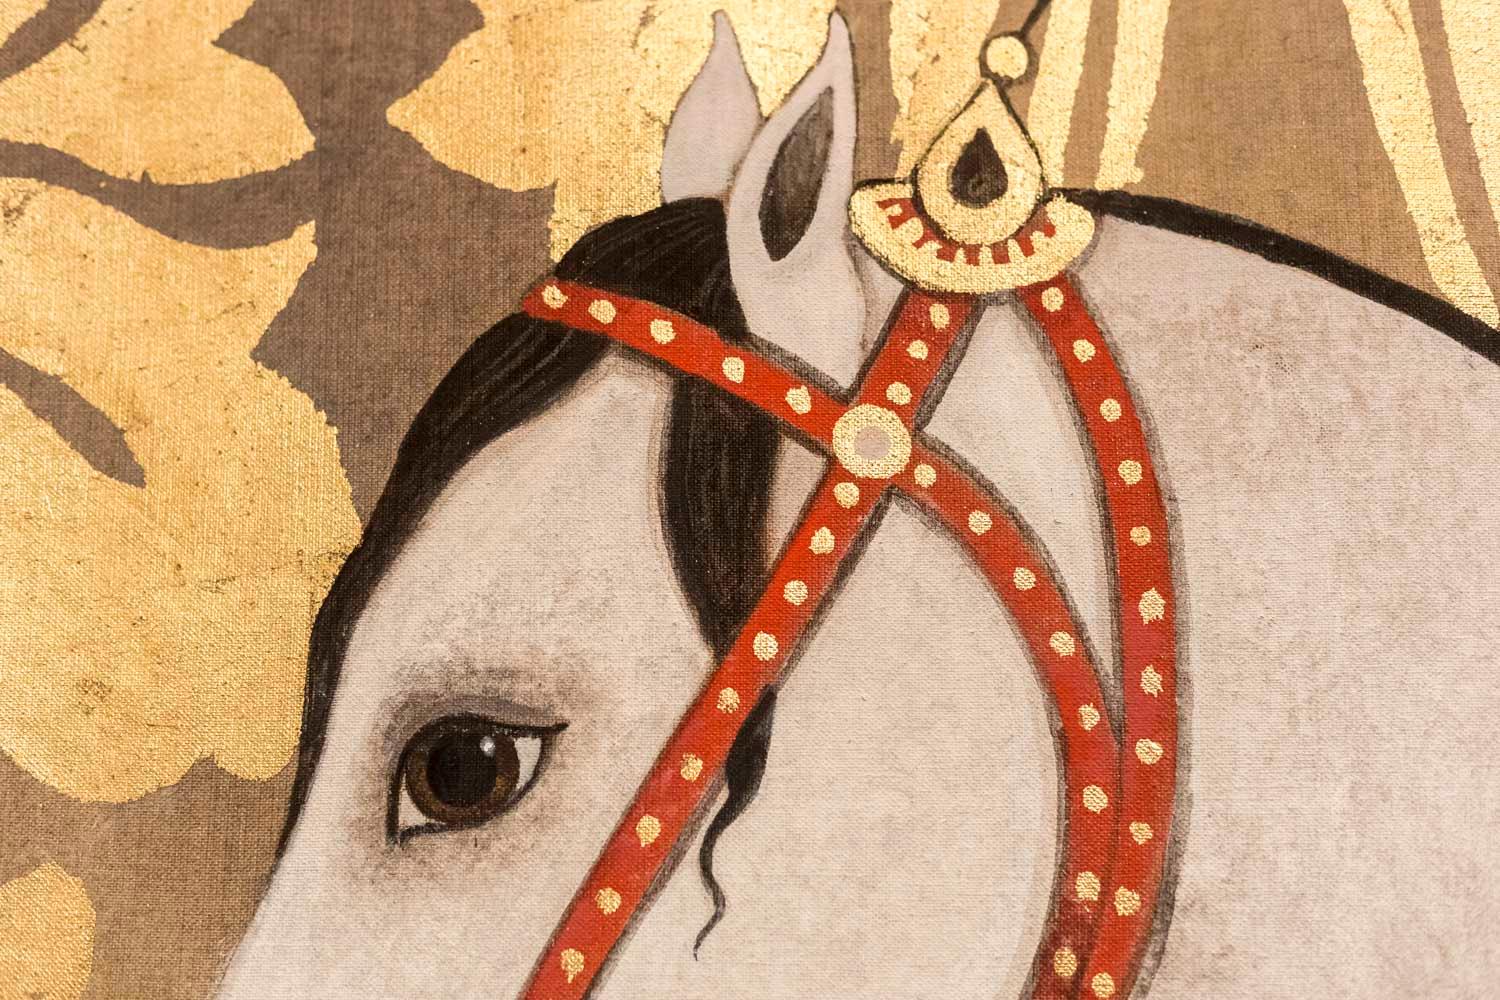 Painted canvas figuring a profile white and orange Arabian horse with a dark mane. It wears an orange harness decorated with gilt stones and a plume on its head. A person rides it but we only perceived his long white ochre stripped coat with orange